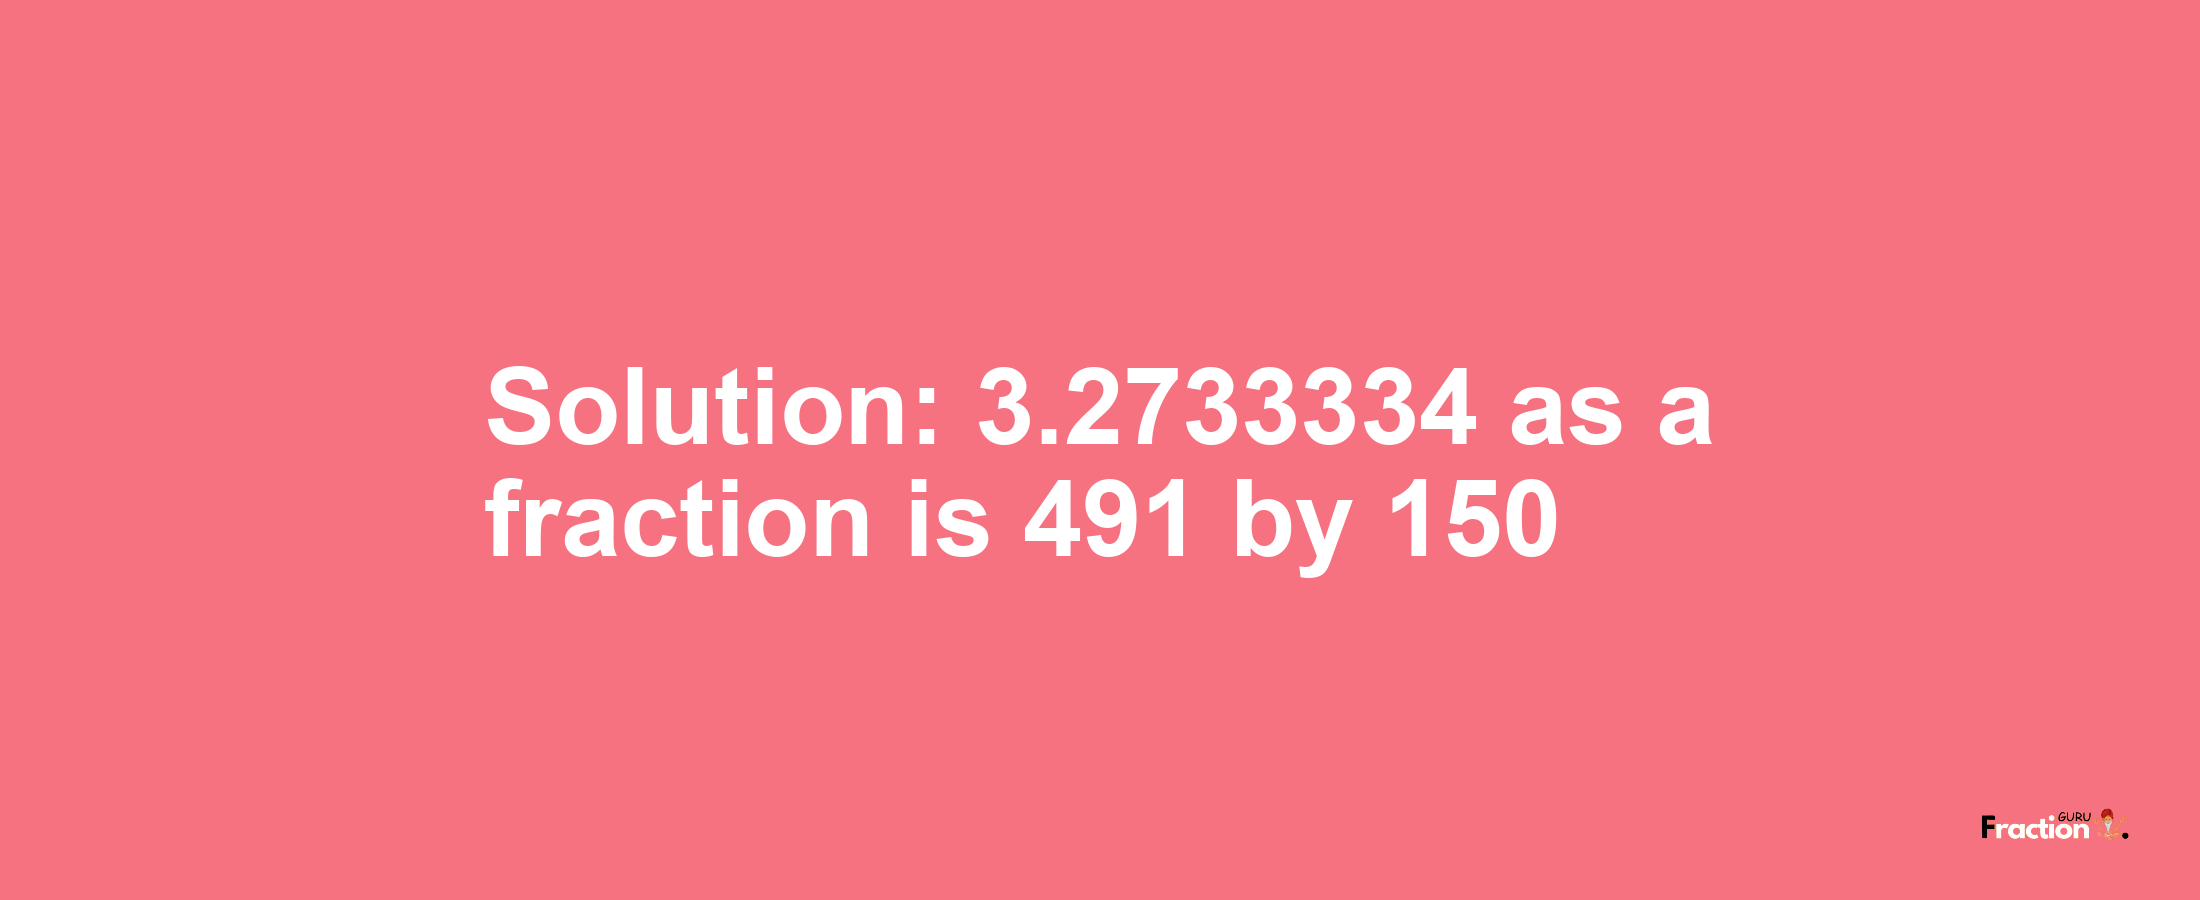 Solution:3.2733334 as a fraction is 491/150